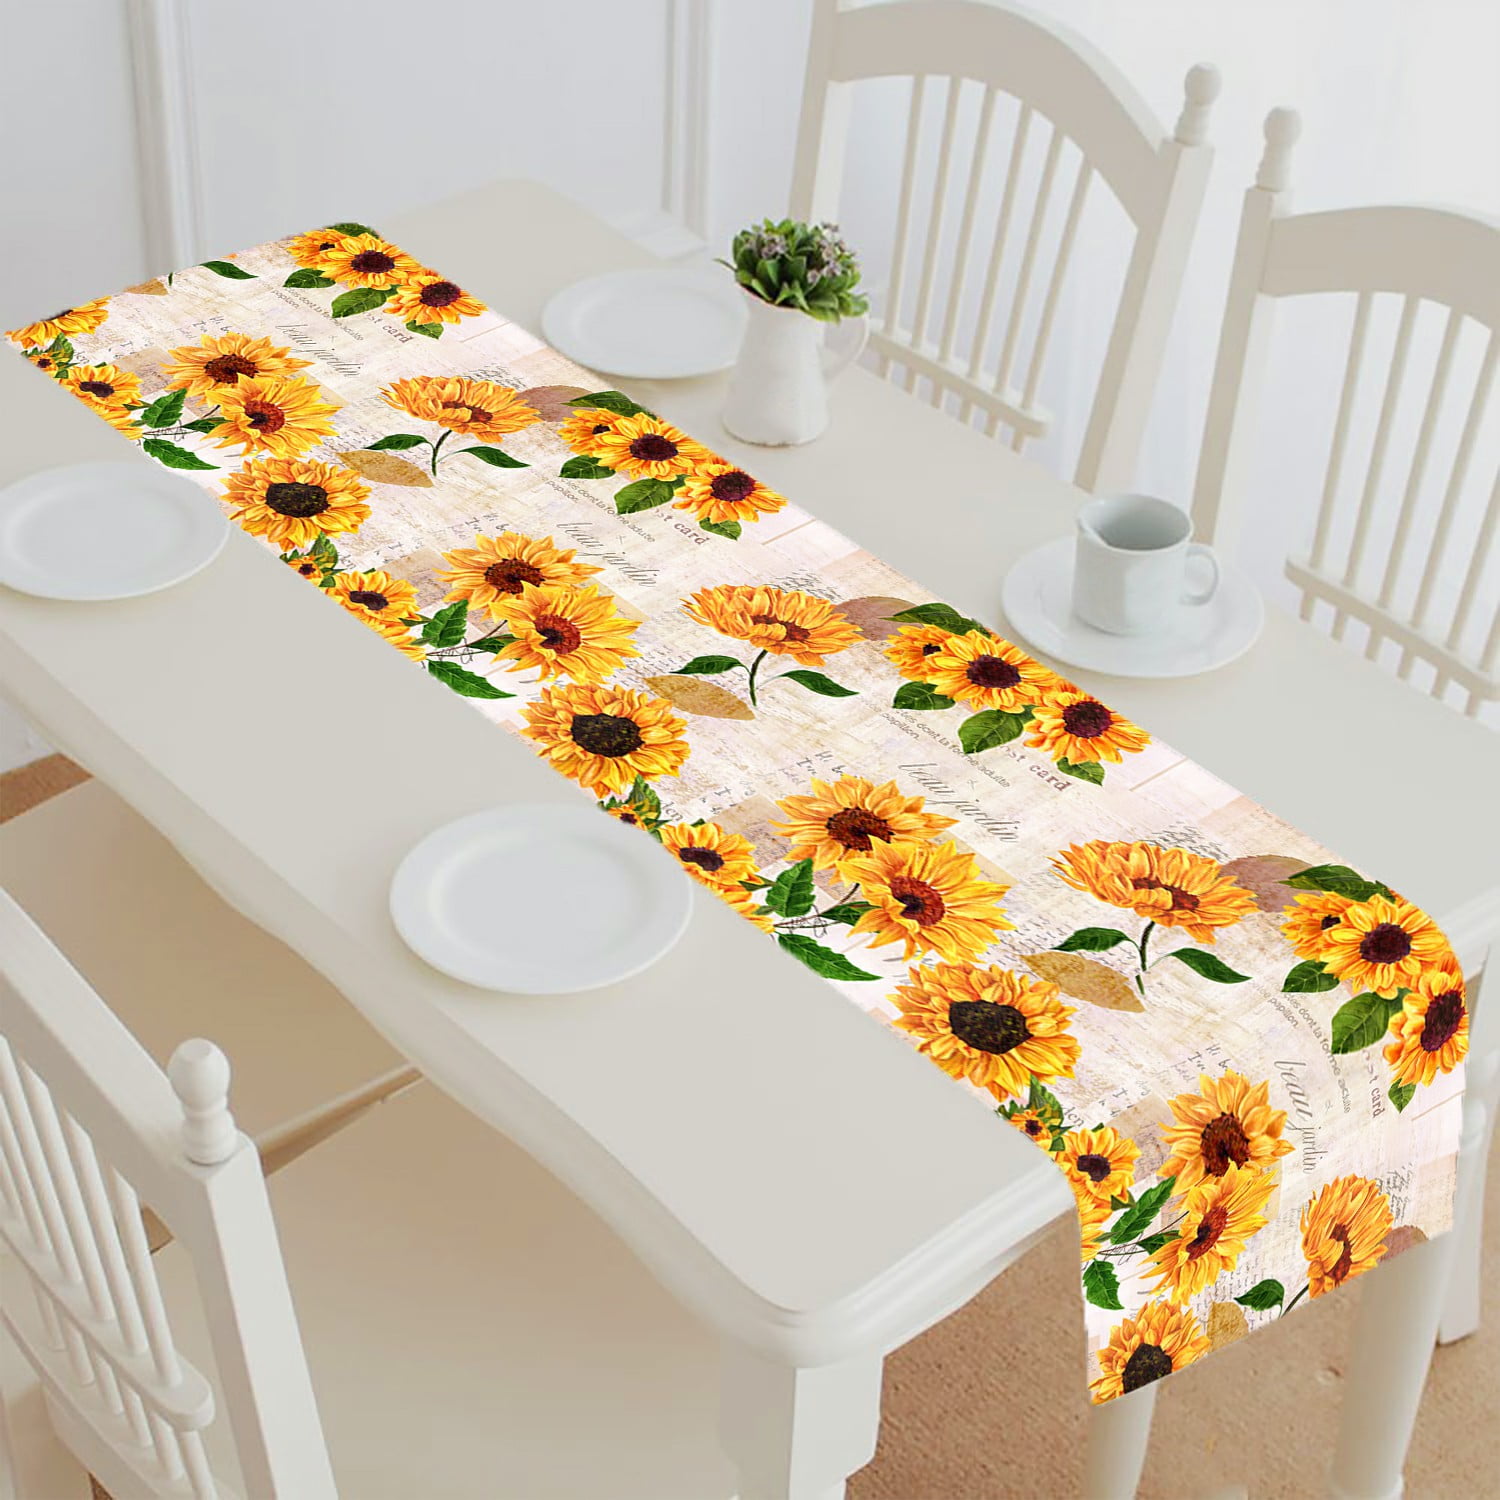 realistic flowers and vibrant colors Table Runner Handmade Unique design home textile Tablemats %100 Linen